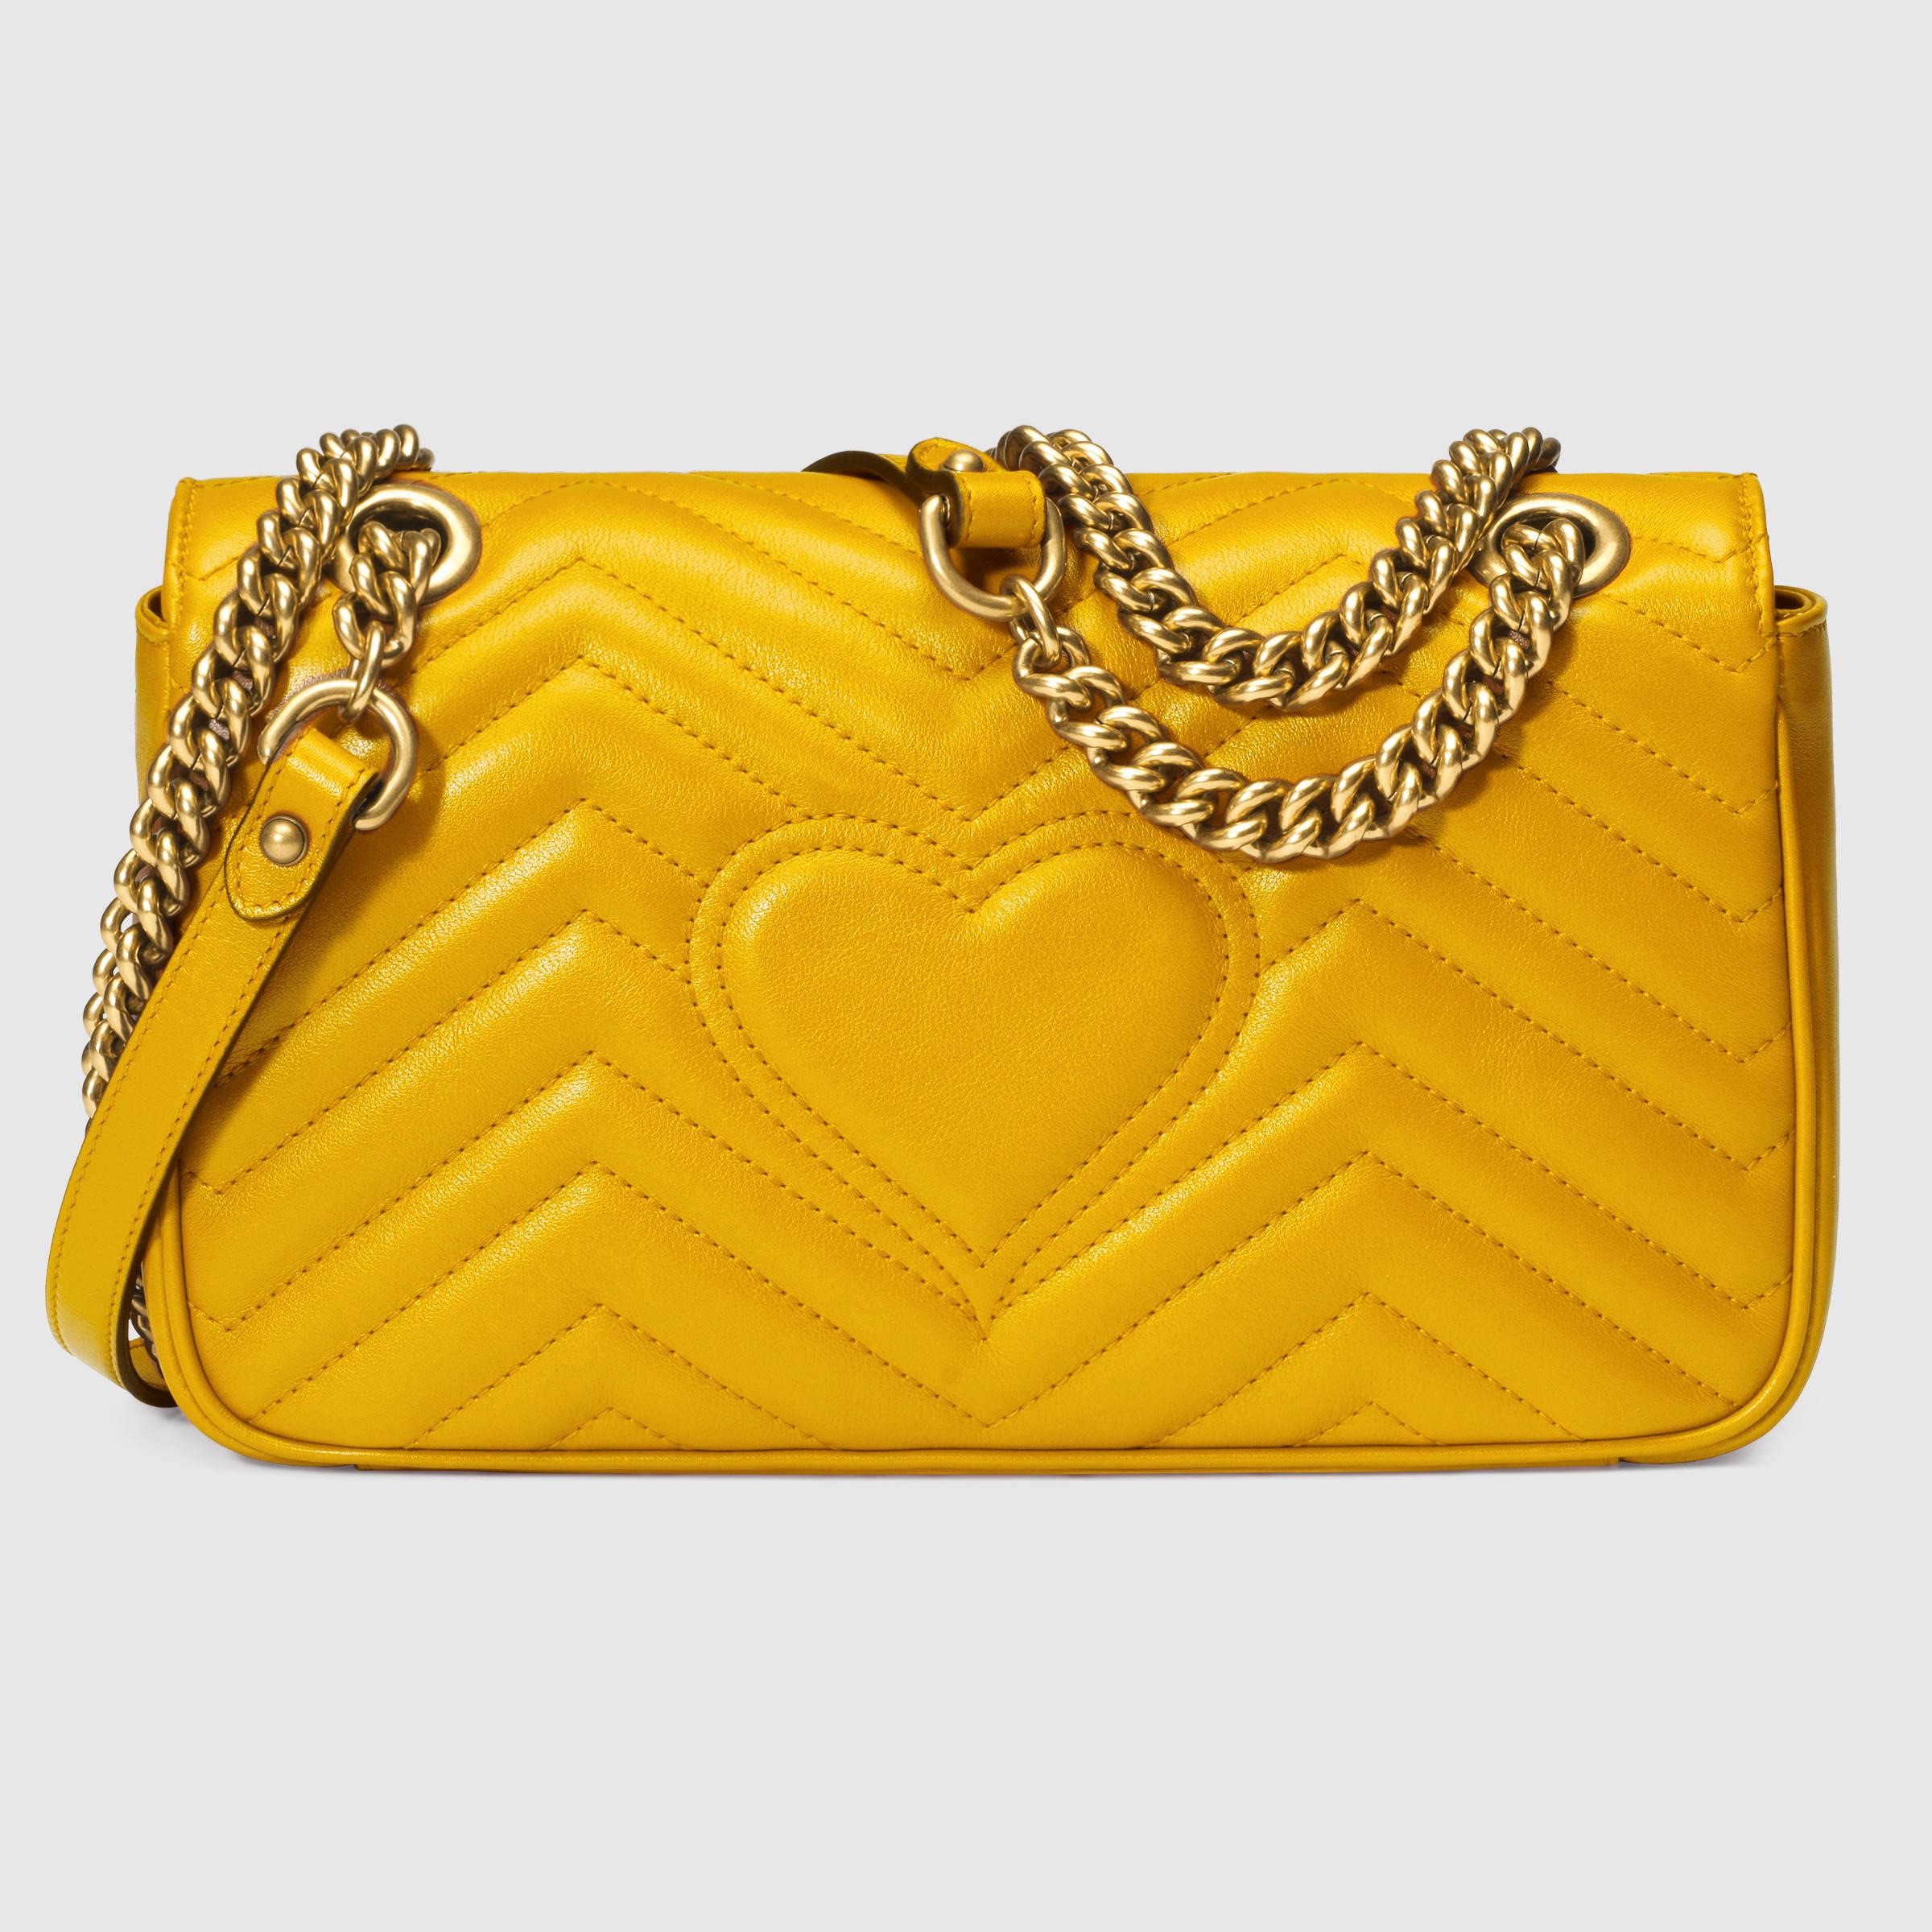  Gucci  Gg Marmont  Matelass  Shoulder Bag  in Yellow  Lyst